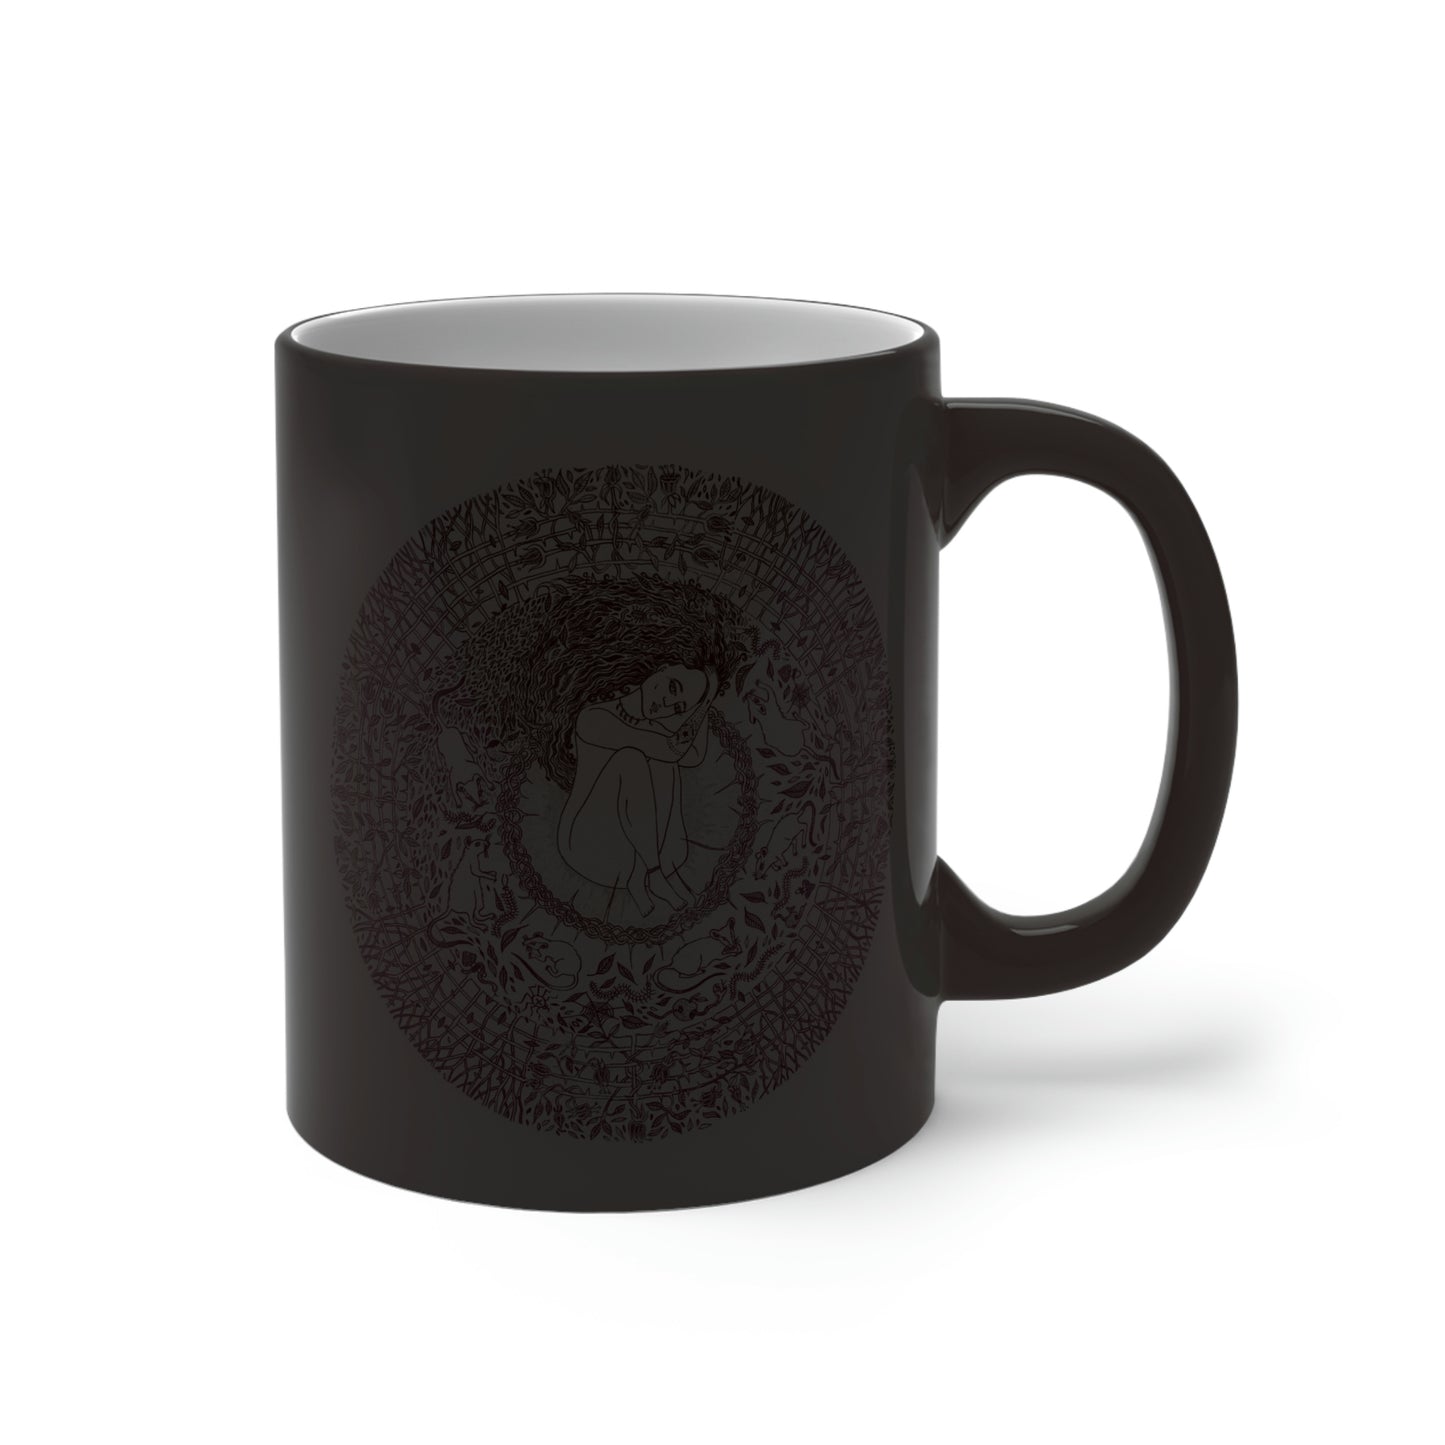 Chinese Zodiac Sign Color Changing Mug (Rat) Limited Edition